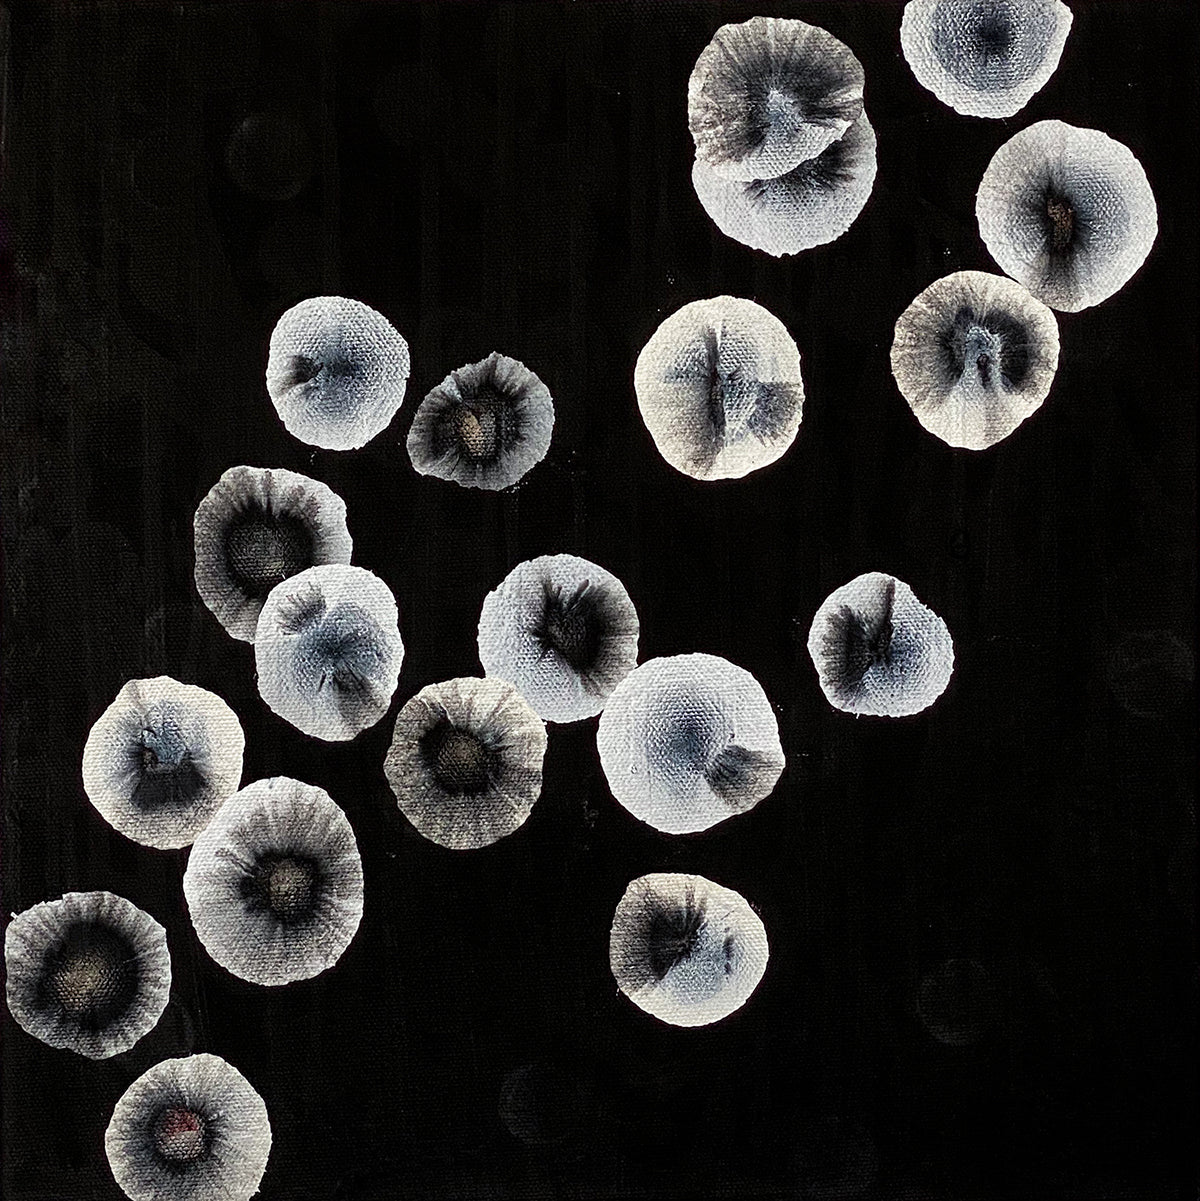 Orbicular Bloom XVII - Abstract Monochrome Painting